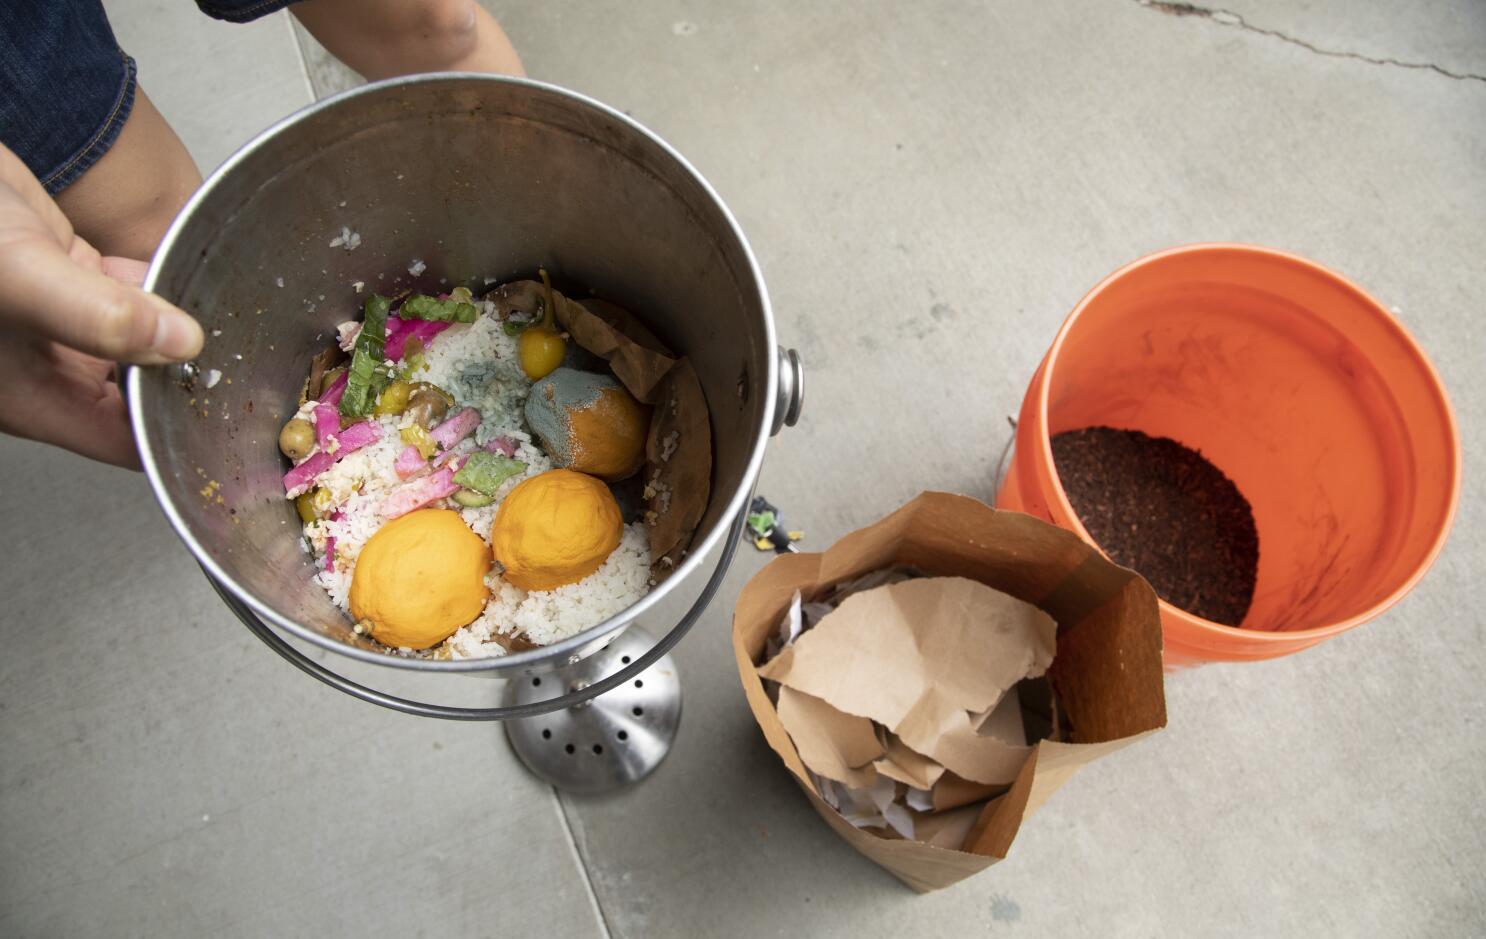 All LA residents can now put food scraps and more compostable items in  green trash bins – Daily News